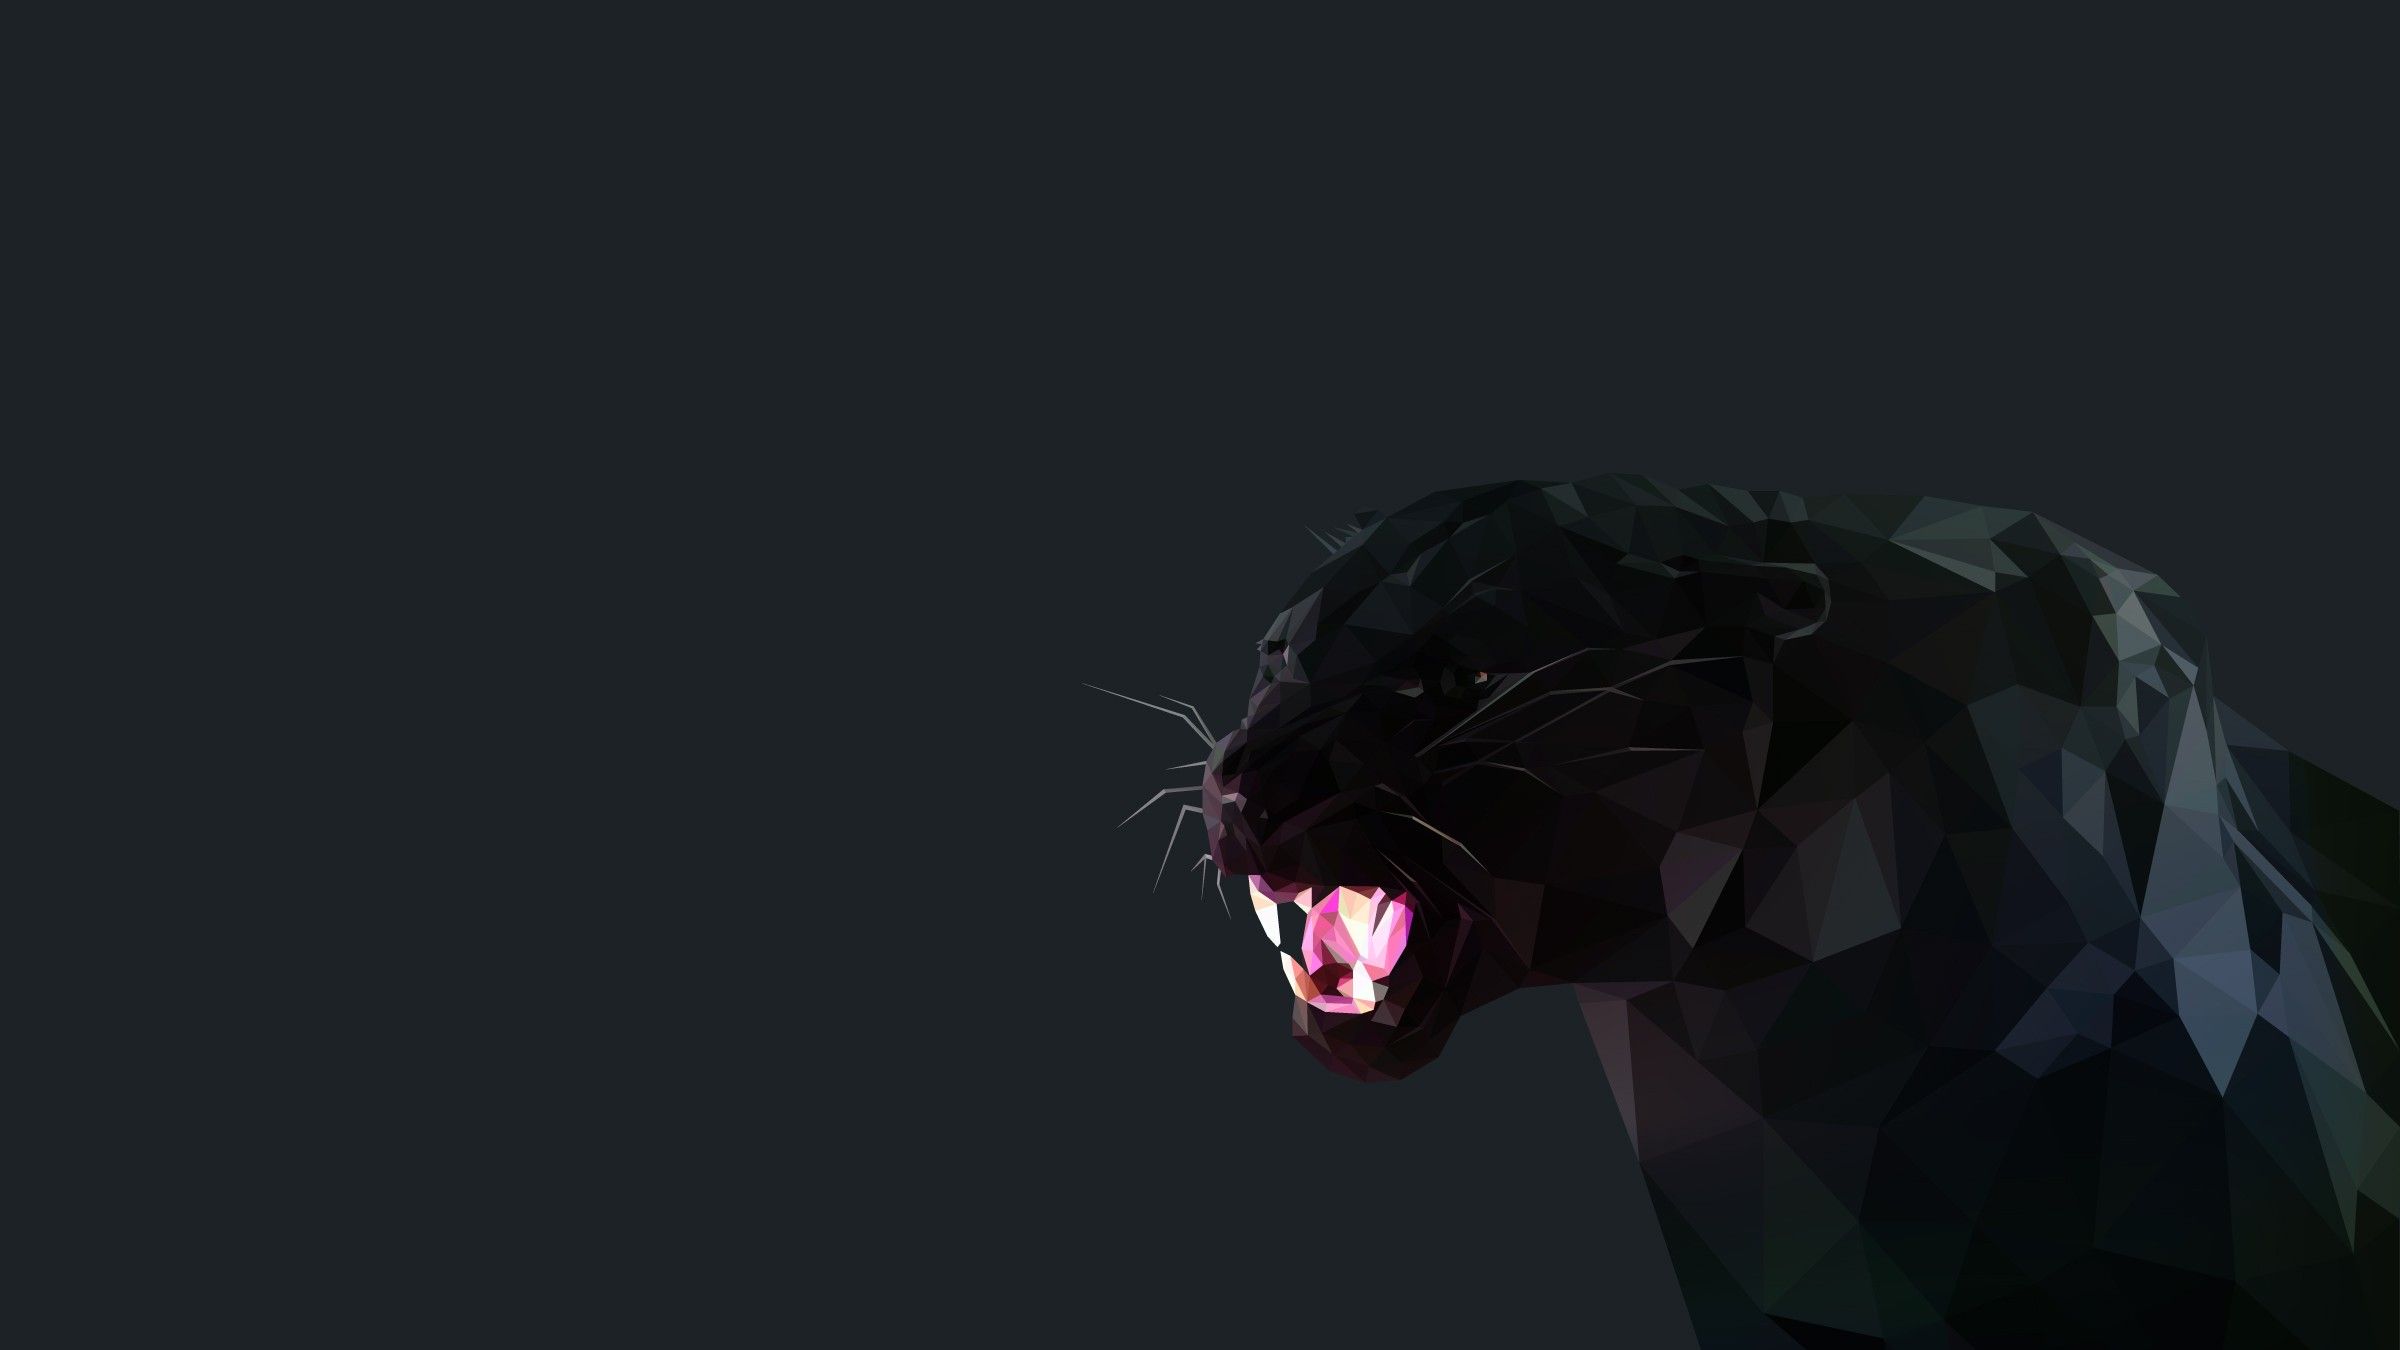 Angry Black Panther Animal Wallpapers